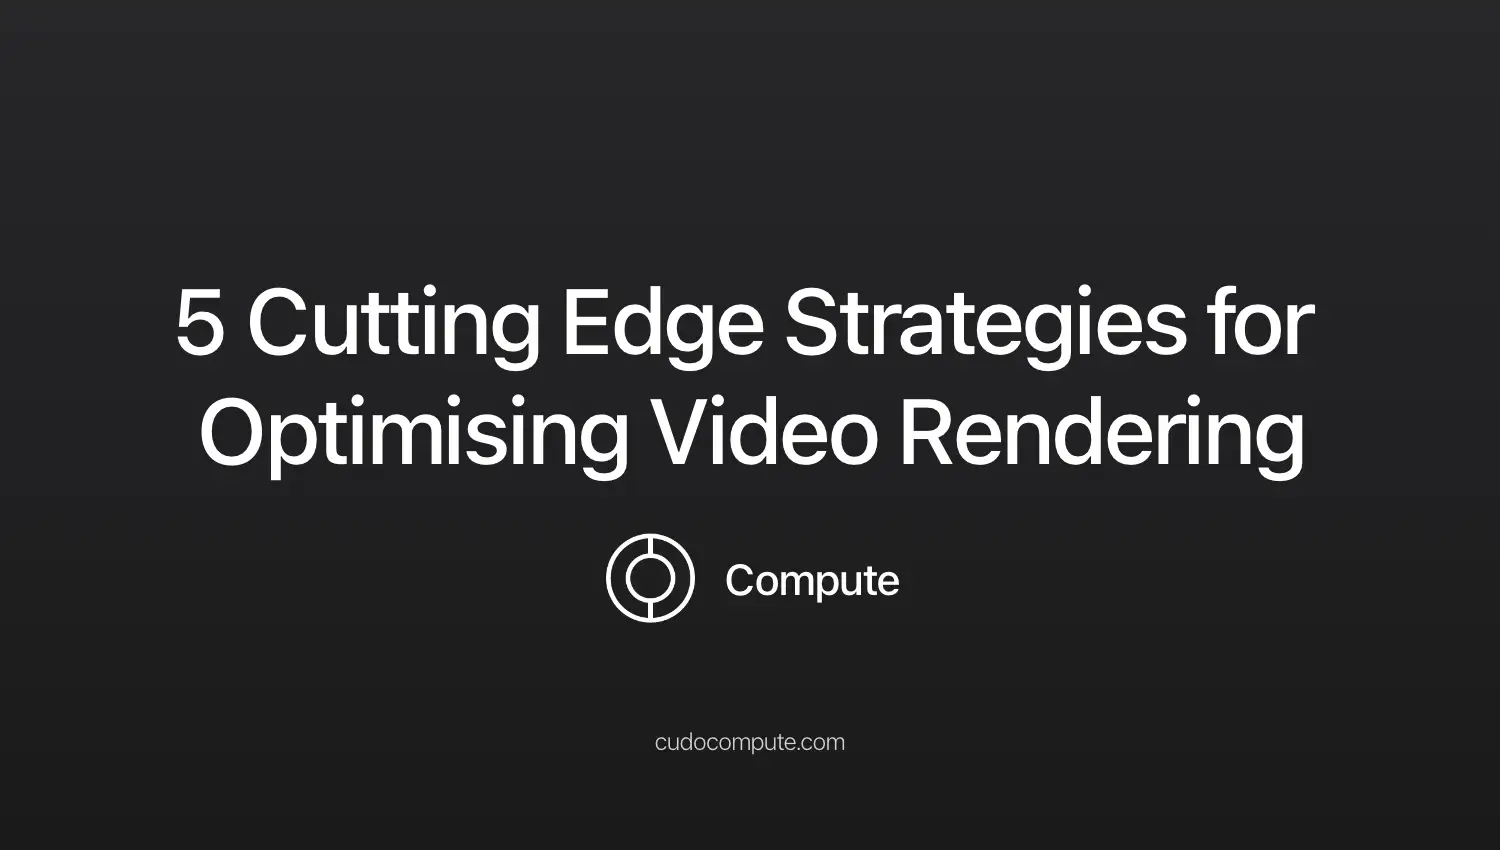 5 cutting edge strategies for optimising video rendering cover photo